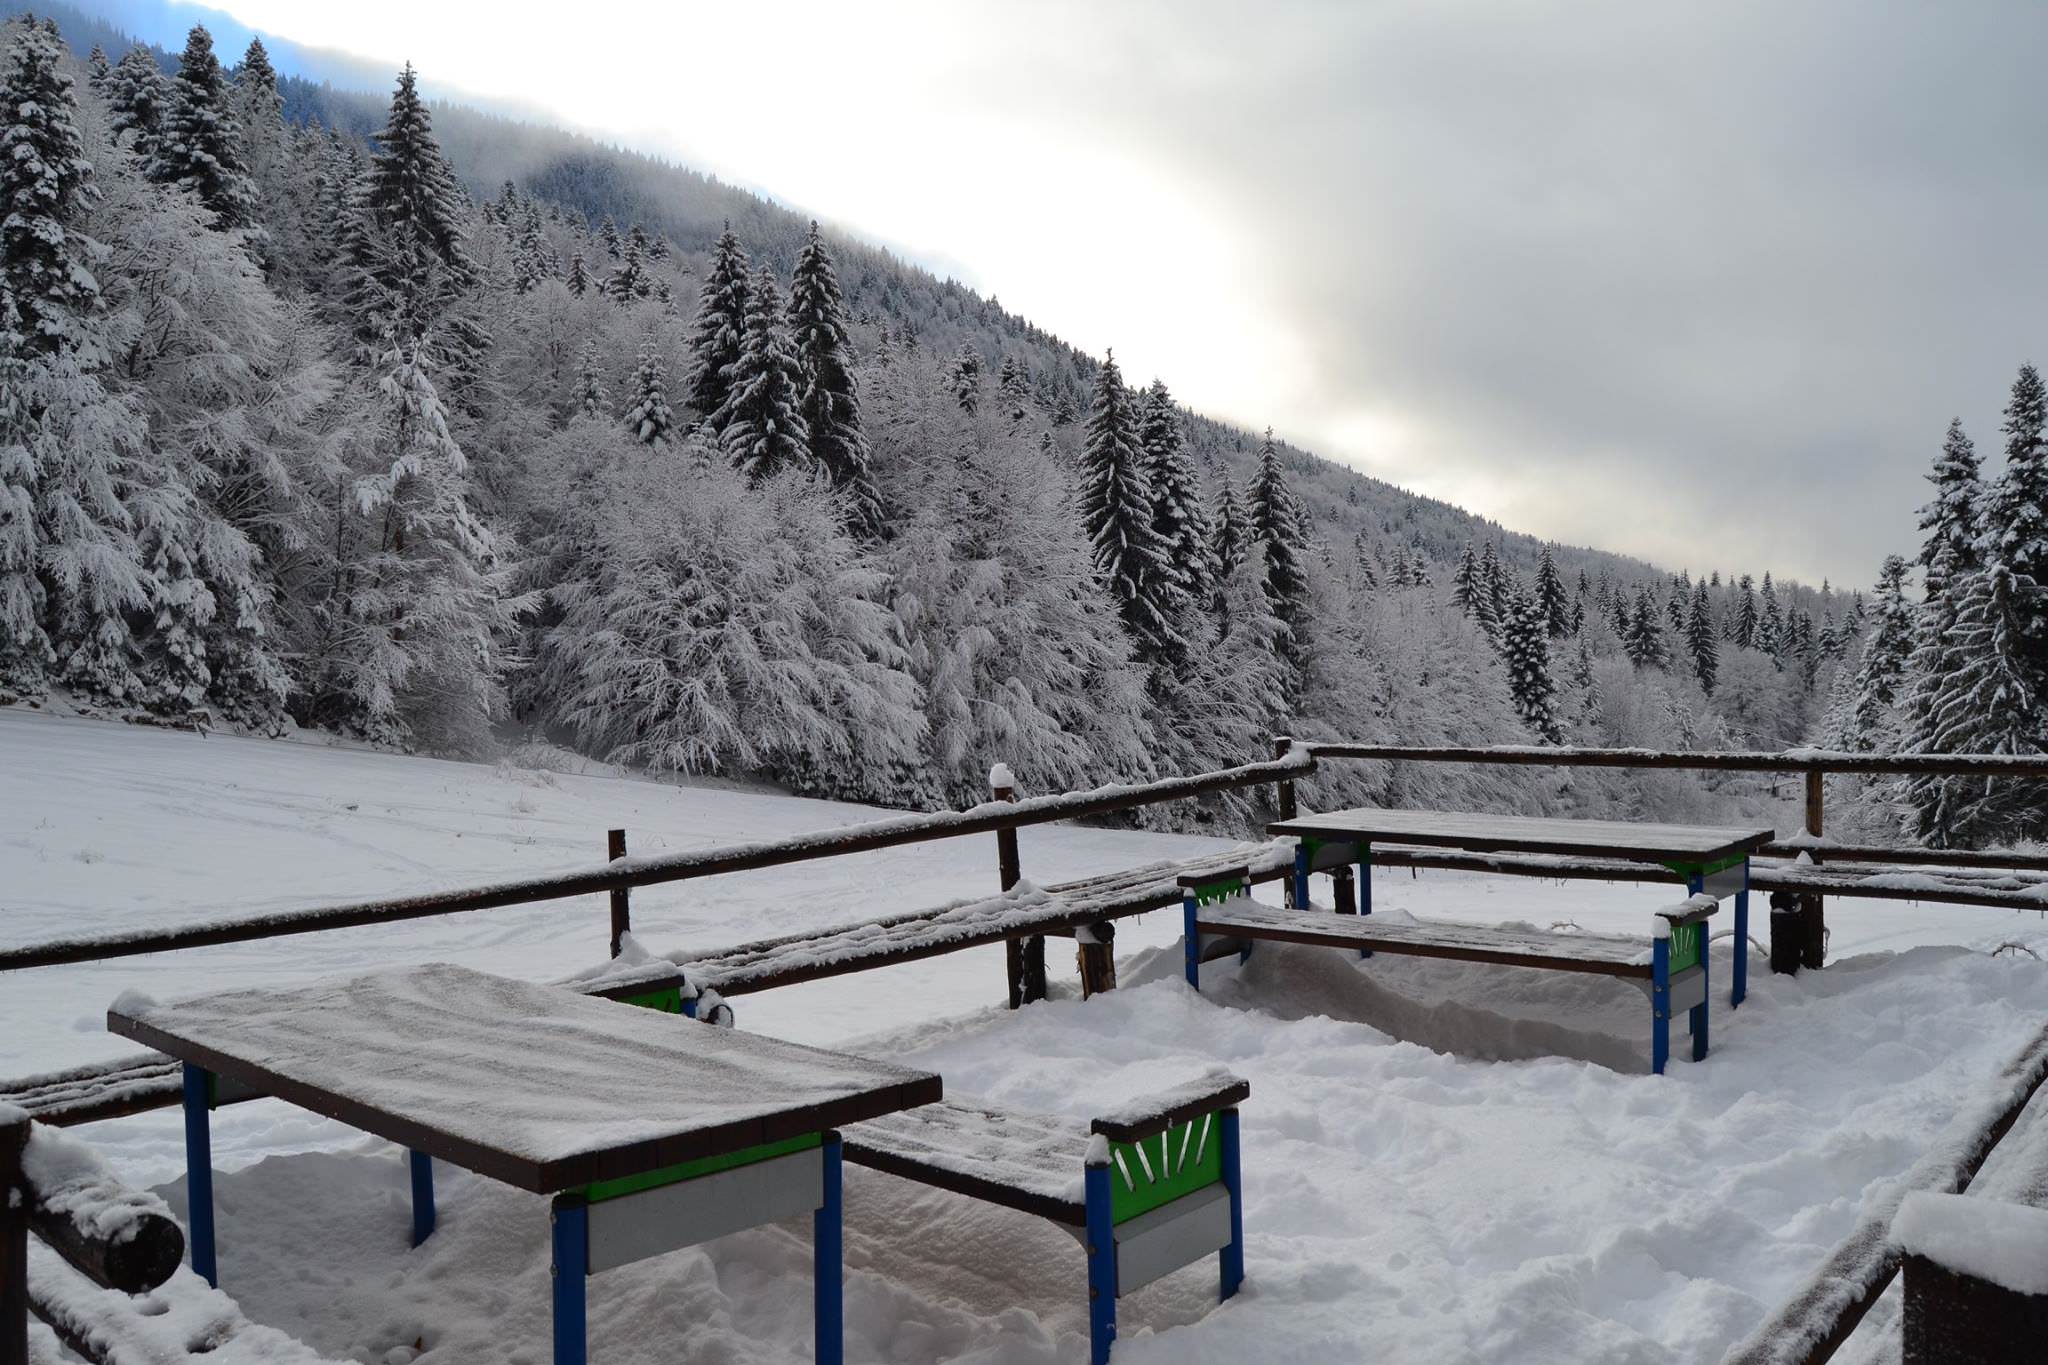 Photo of the terrace of the teahouse. In the foreground are benches with tables, and in the background is the runway and snowy pines.